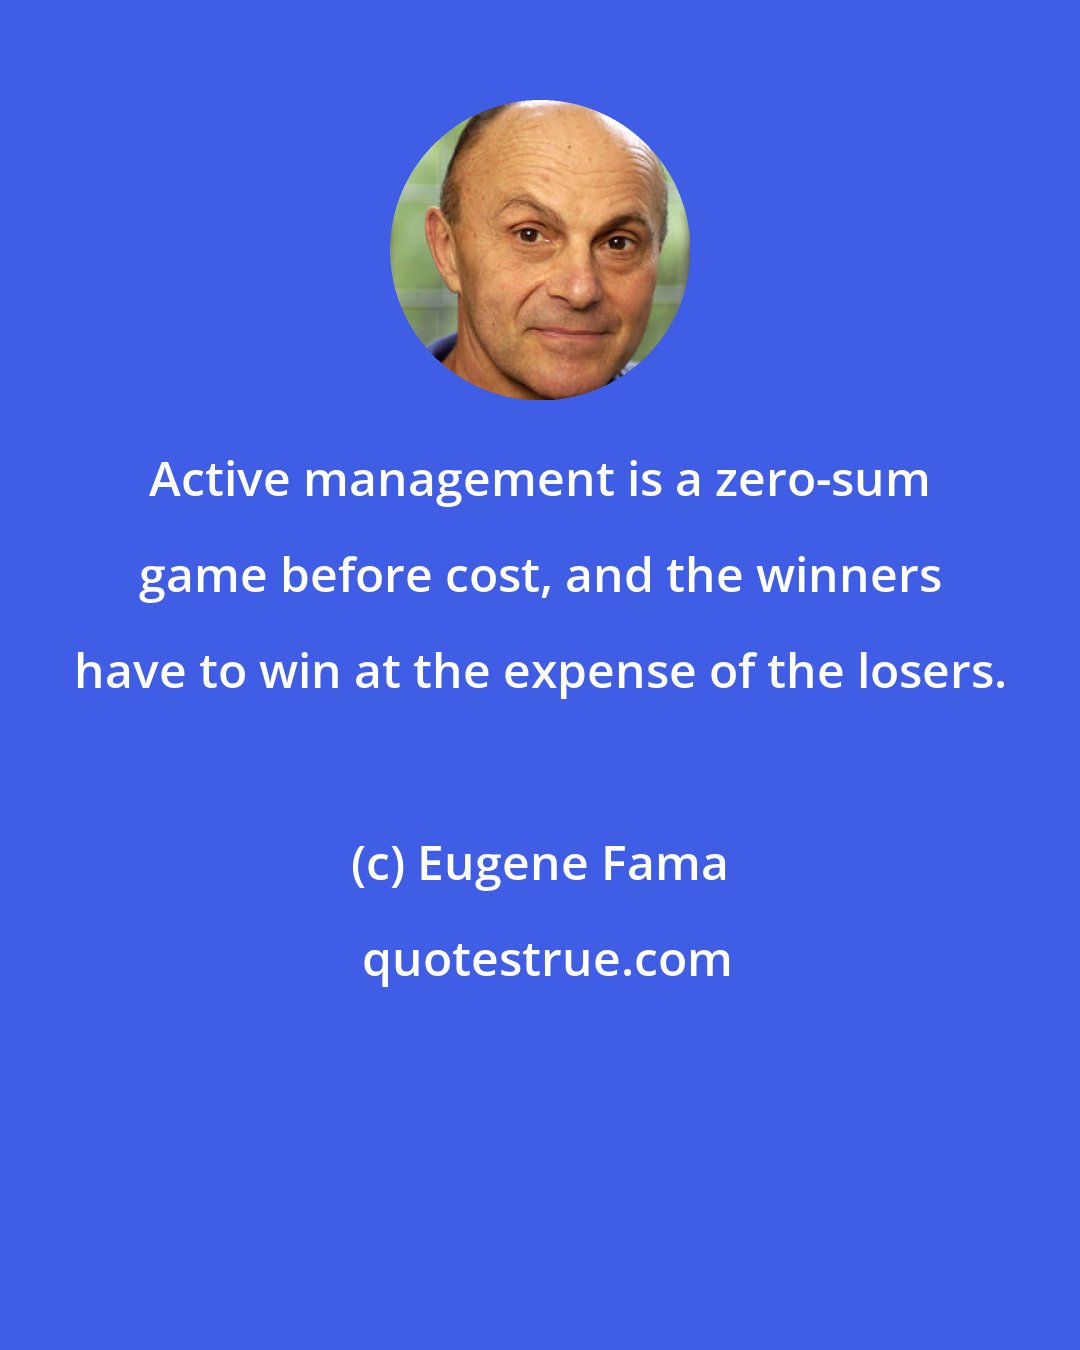 Eugene Fama: Active management is a zero-sum game before cost, and the winners have to win at the expense of the losers.